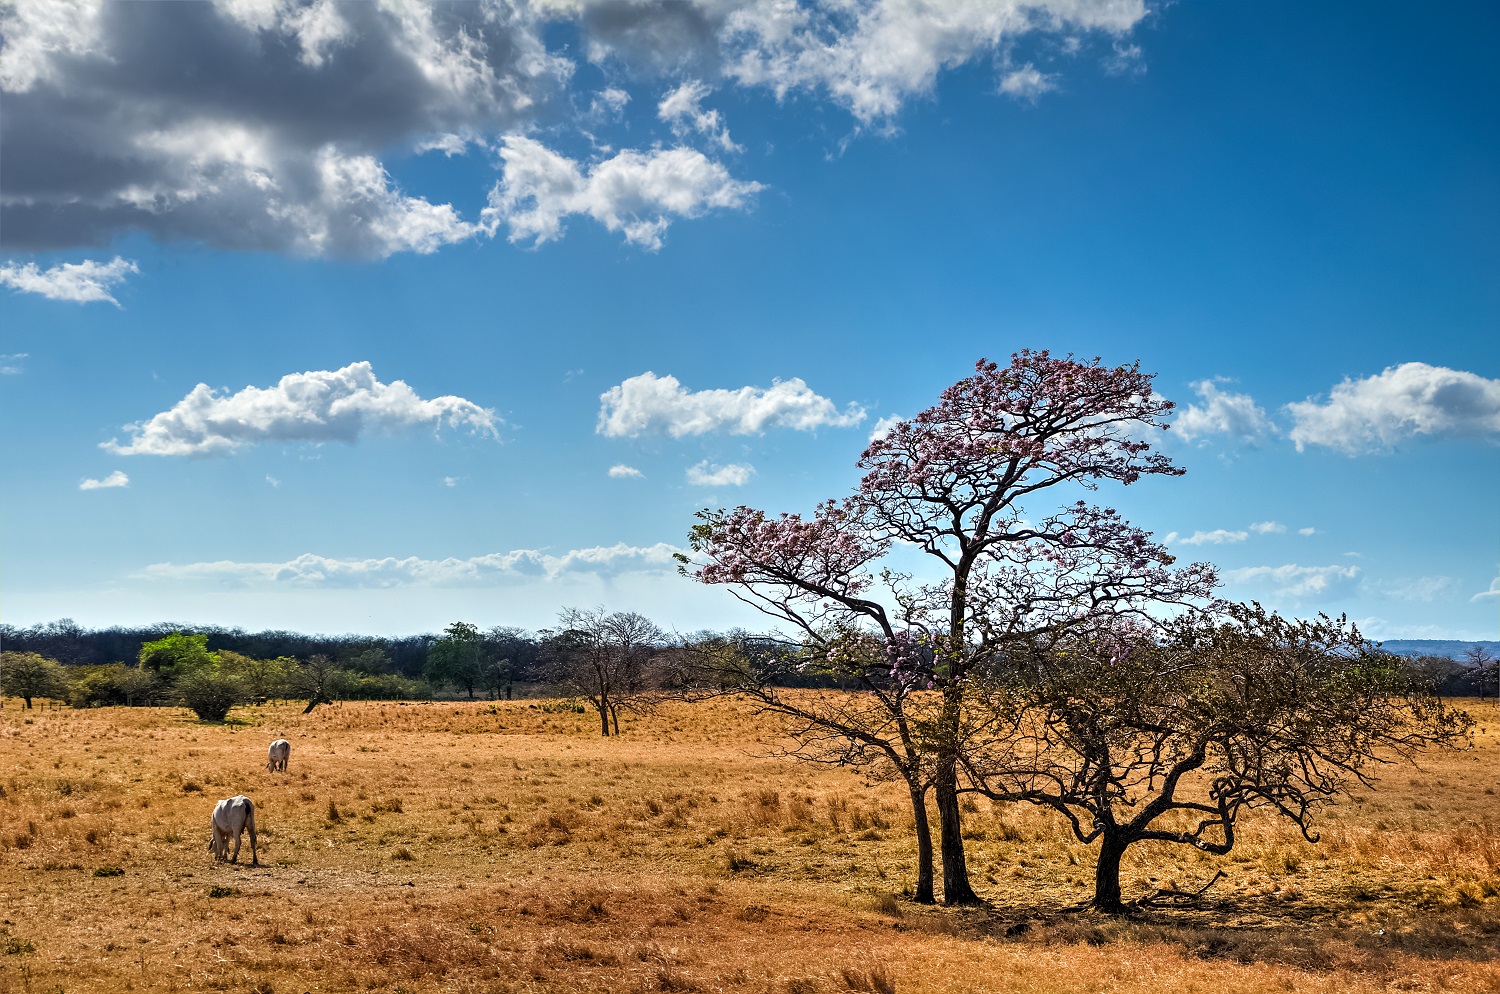 The plains of Guanacaste, Costa Rica